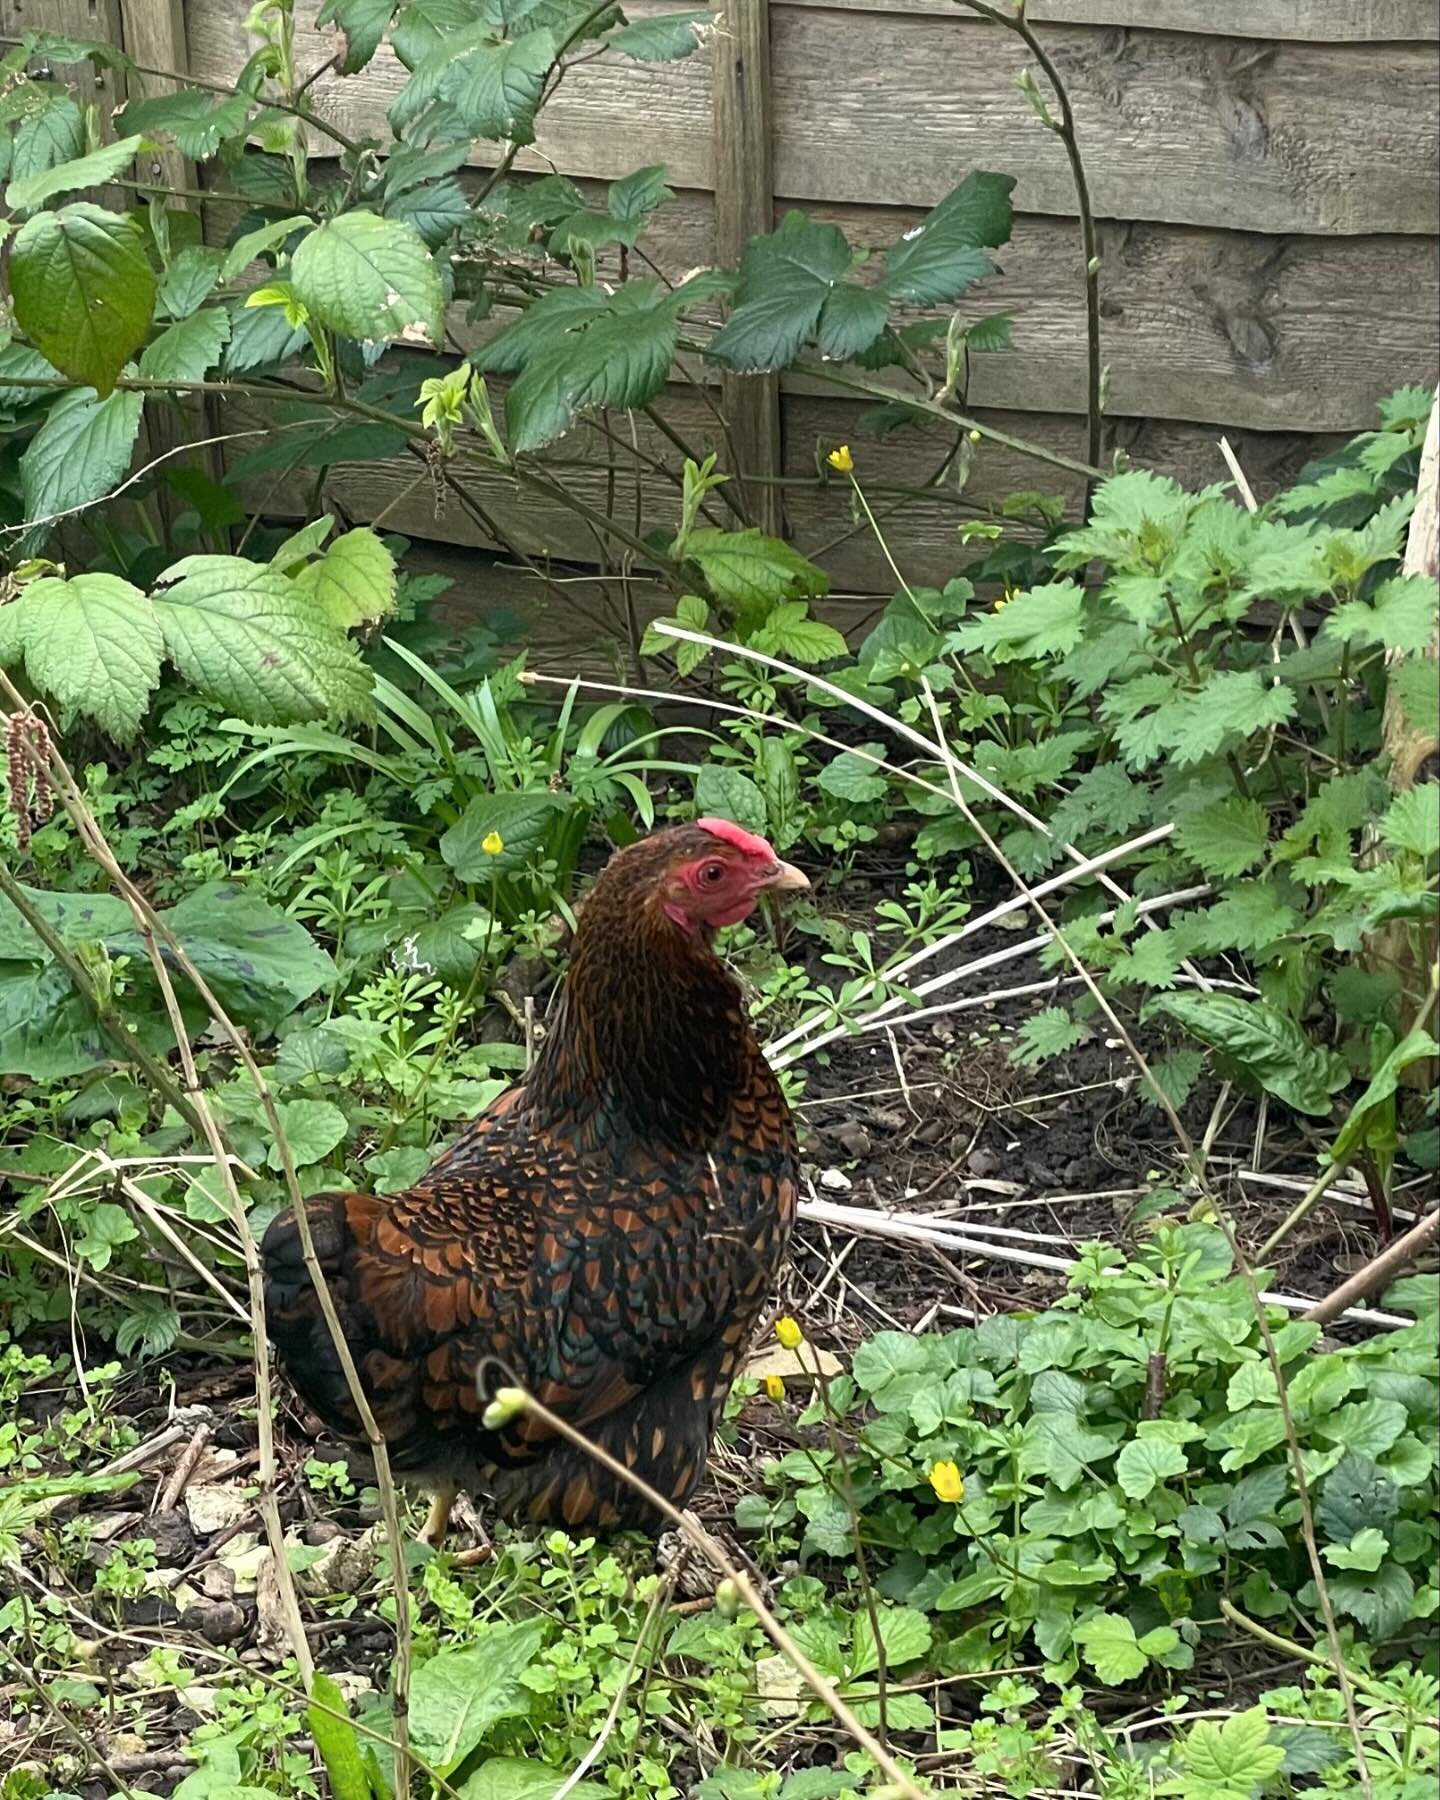 Coco the chicken, off on an adventure